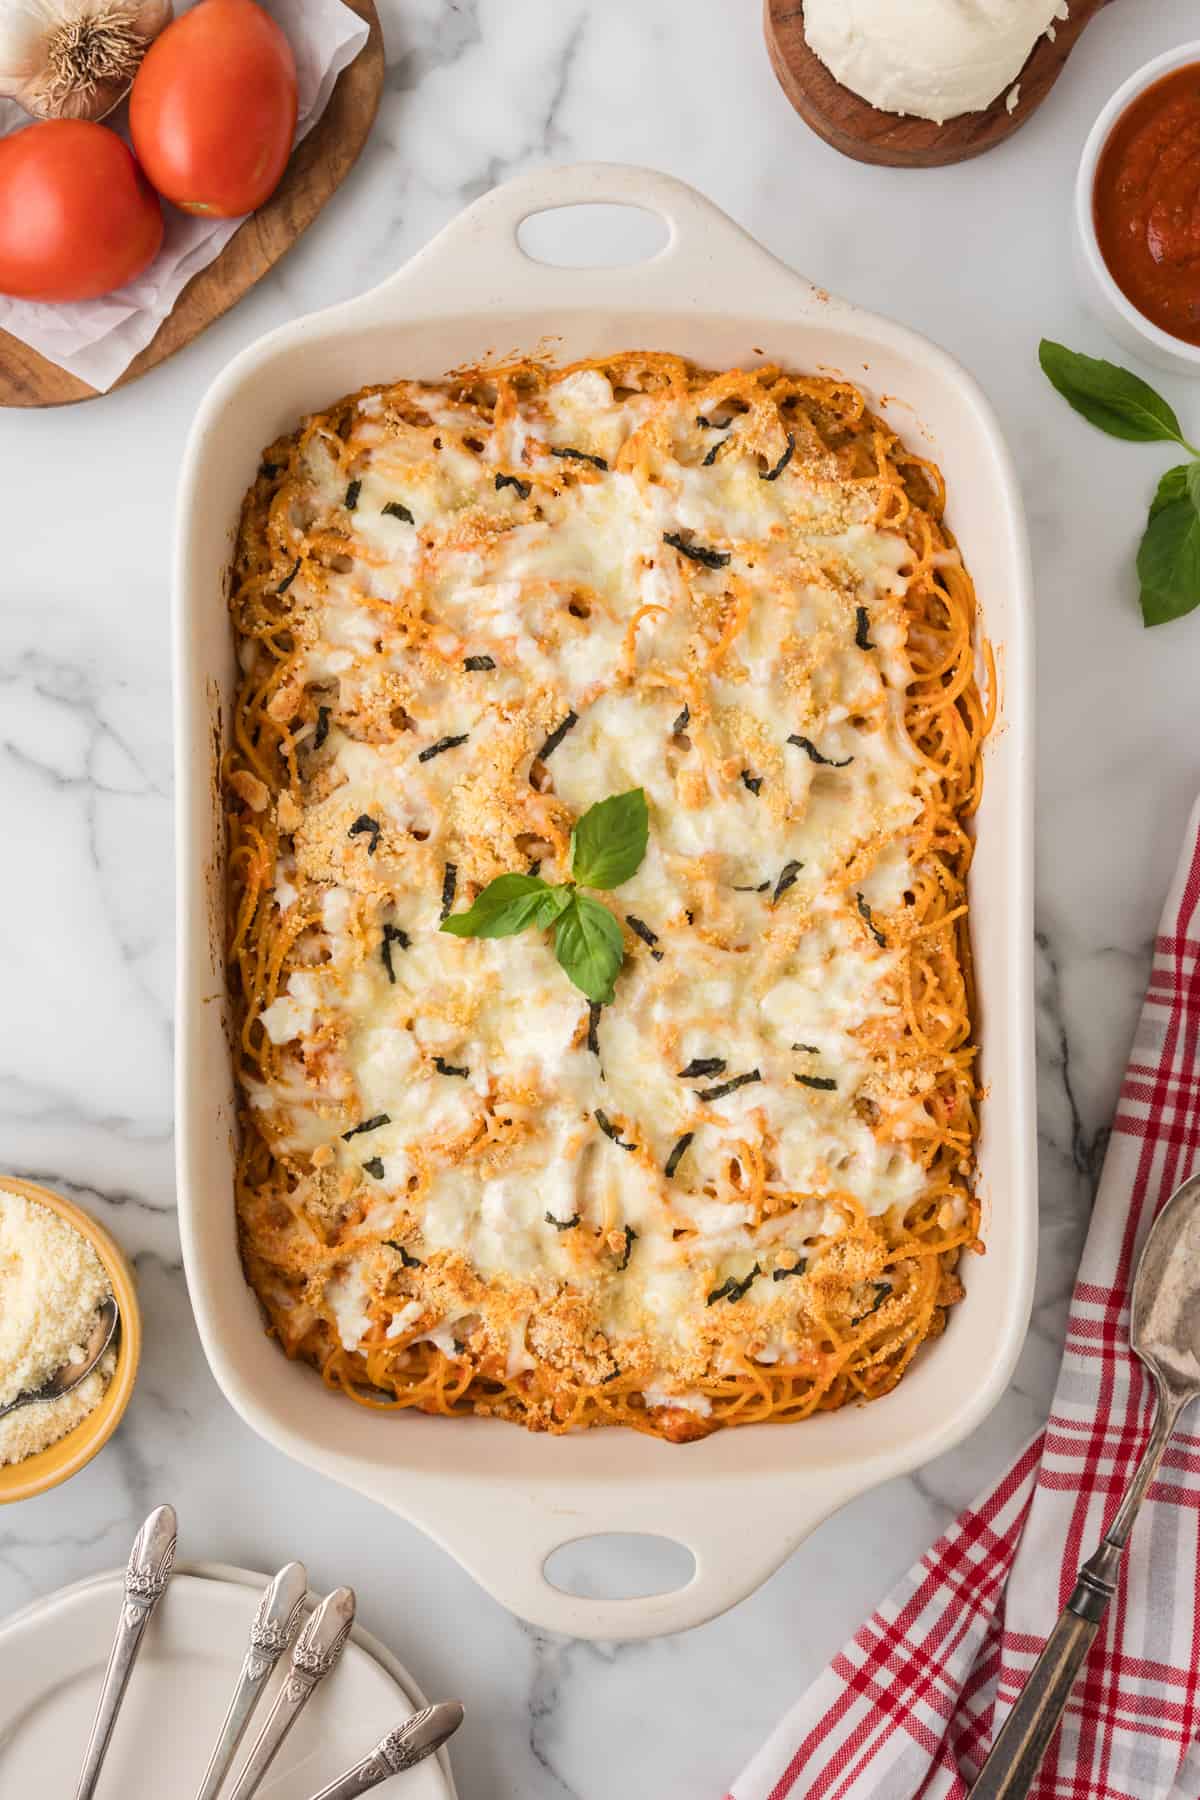 baked Spaghetti in a white casserole dish with a fork.